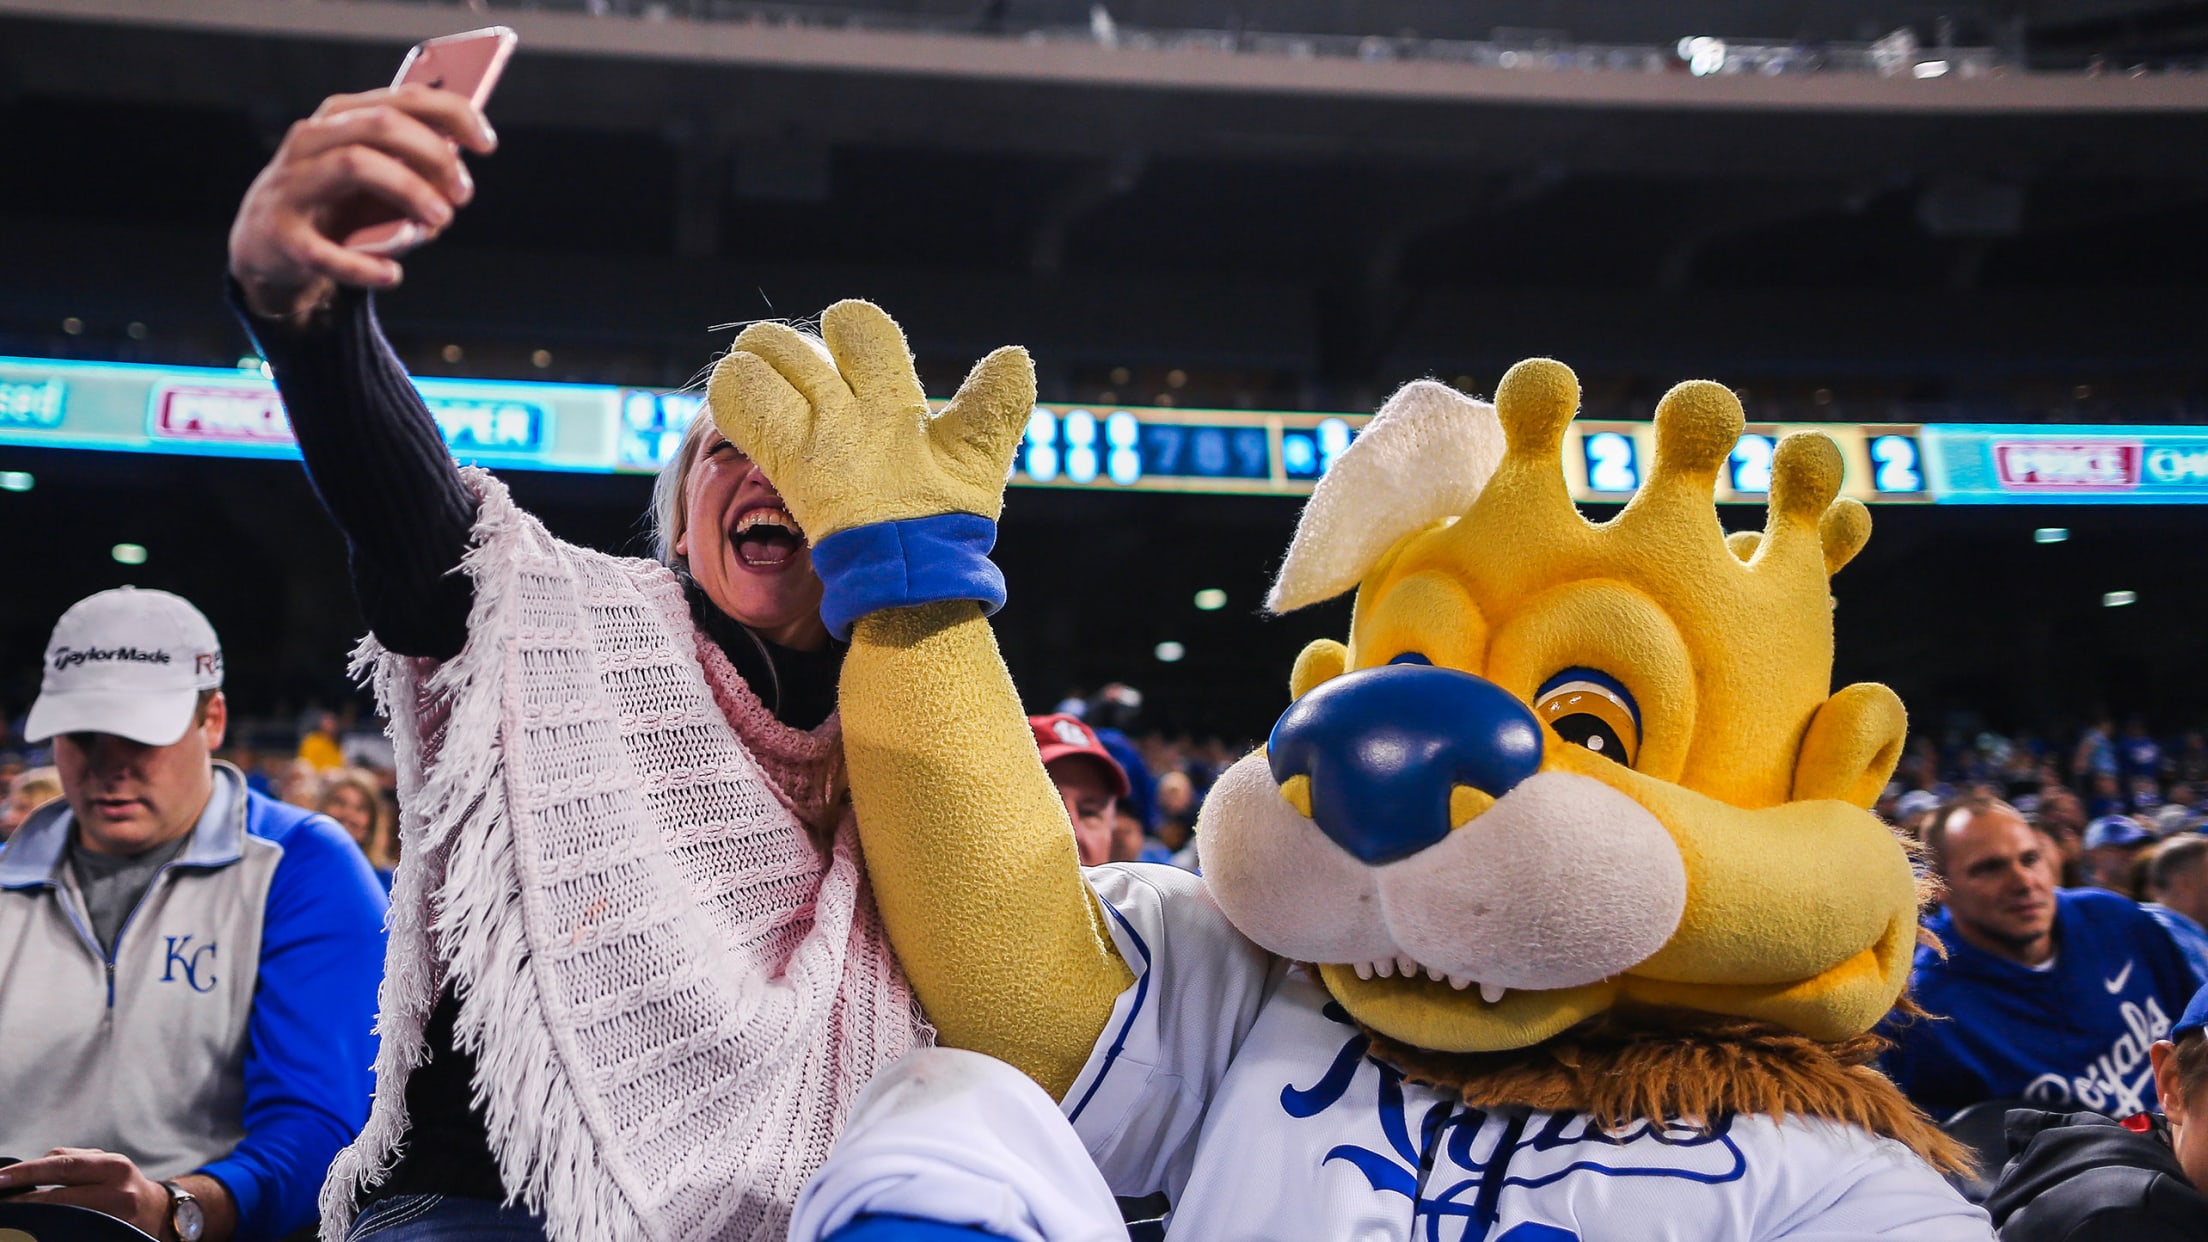 Sluggerrr, the Royals mascot, wins in court once again - NBC Sports